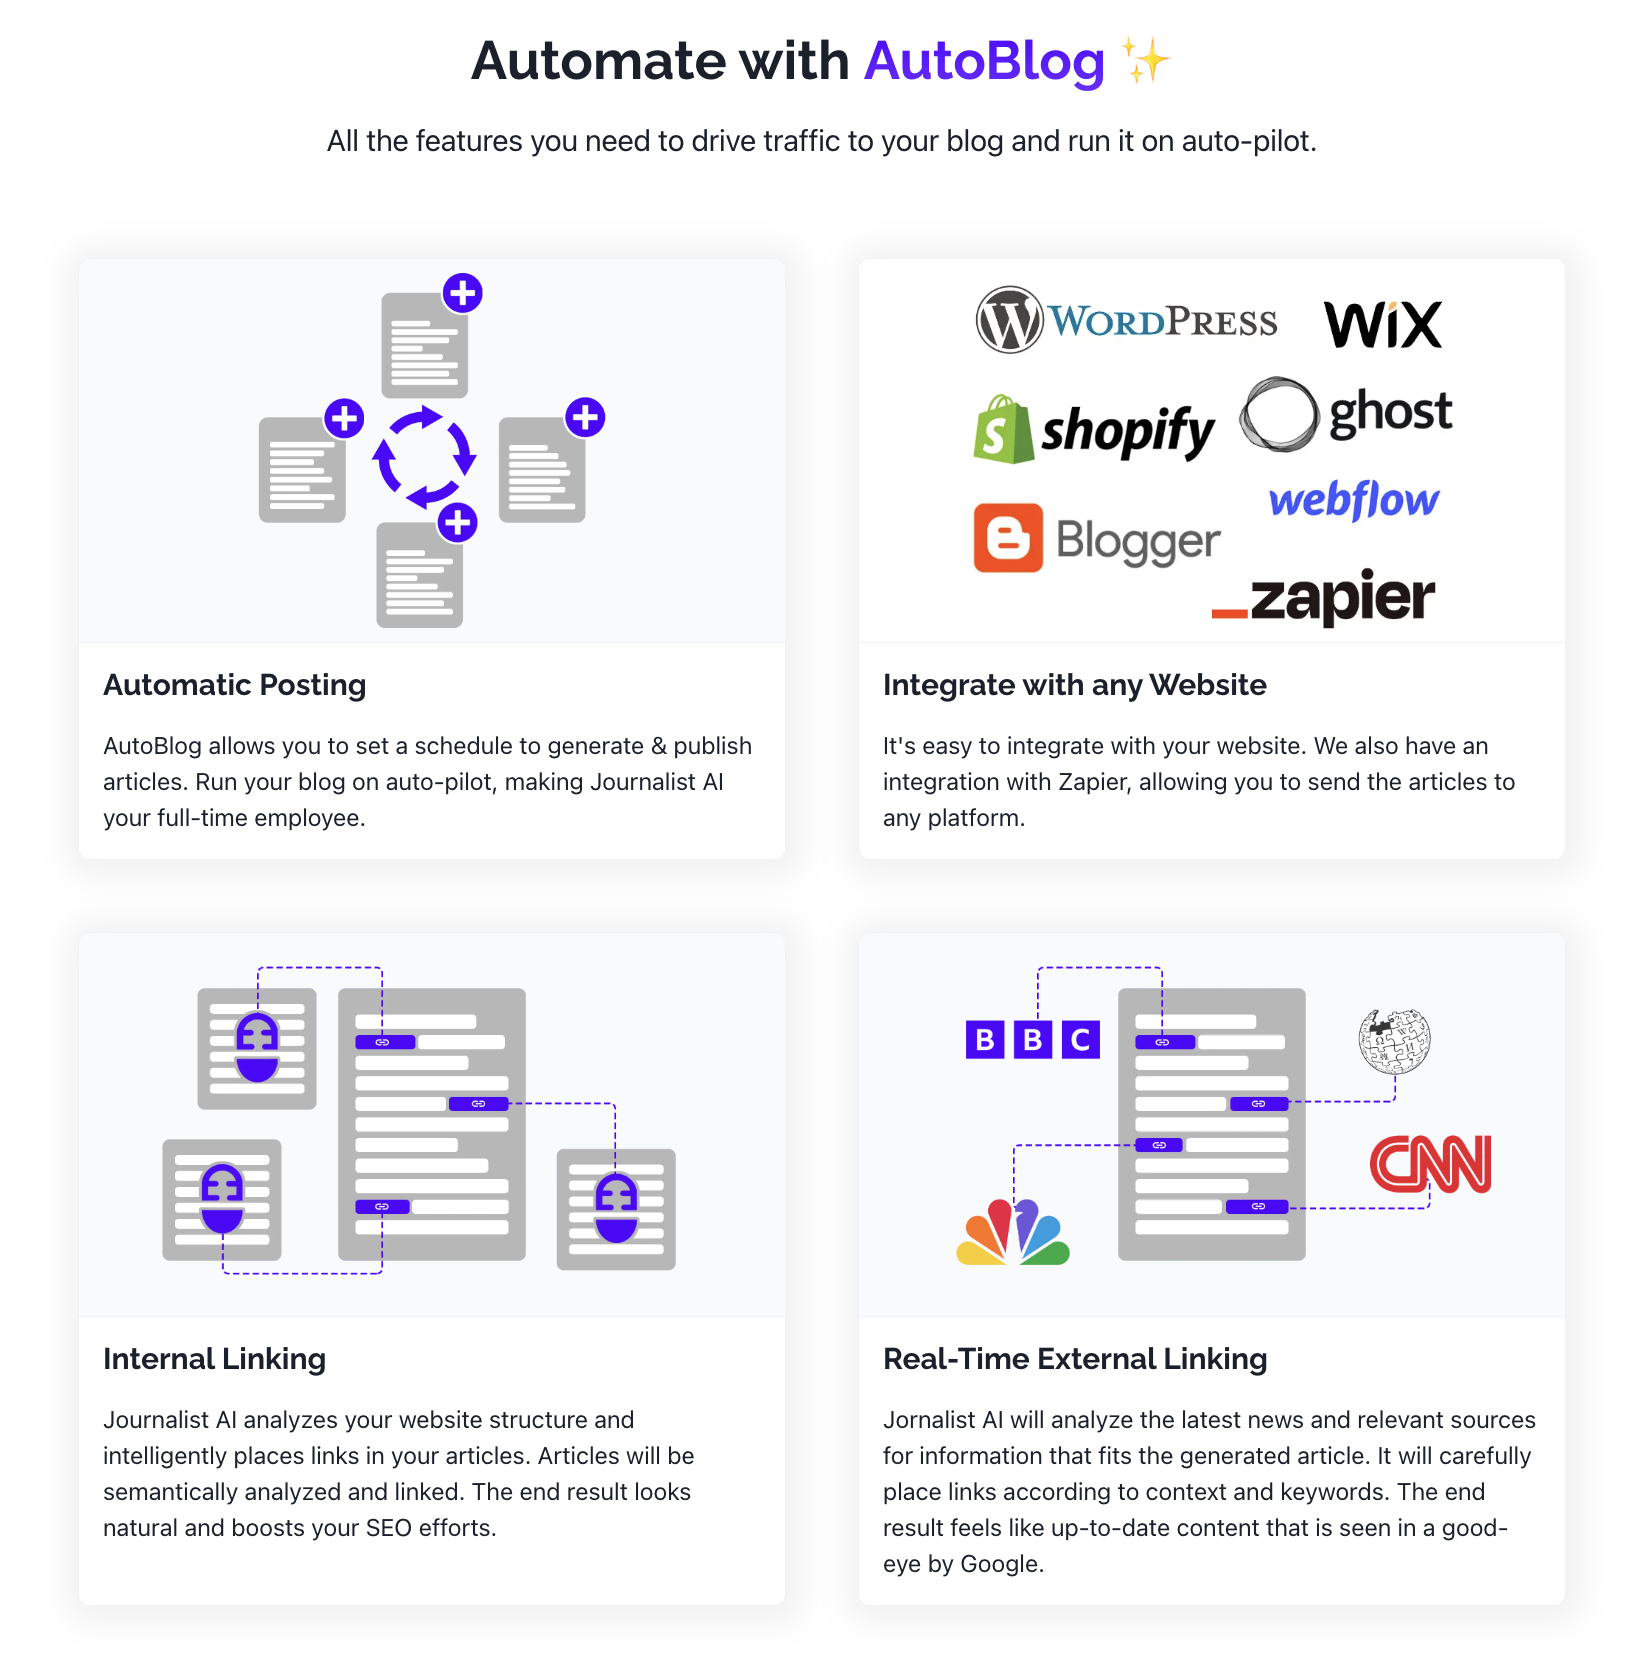 autoblogging with journalist ai - a review